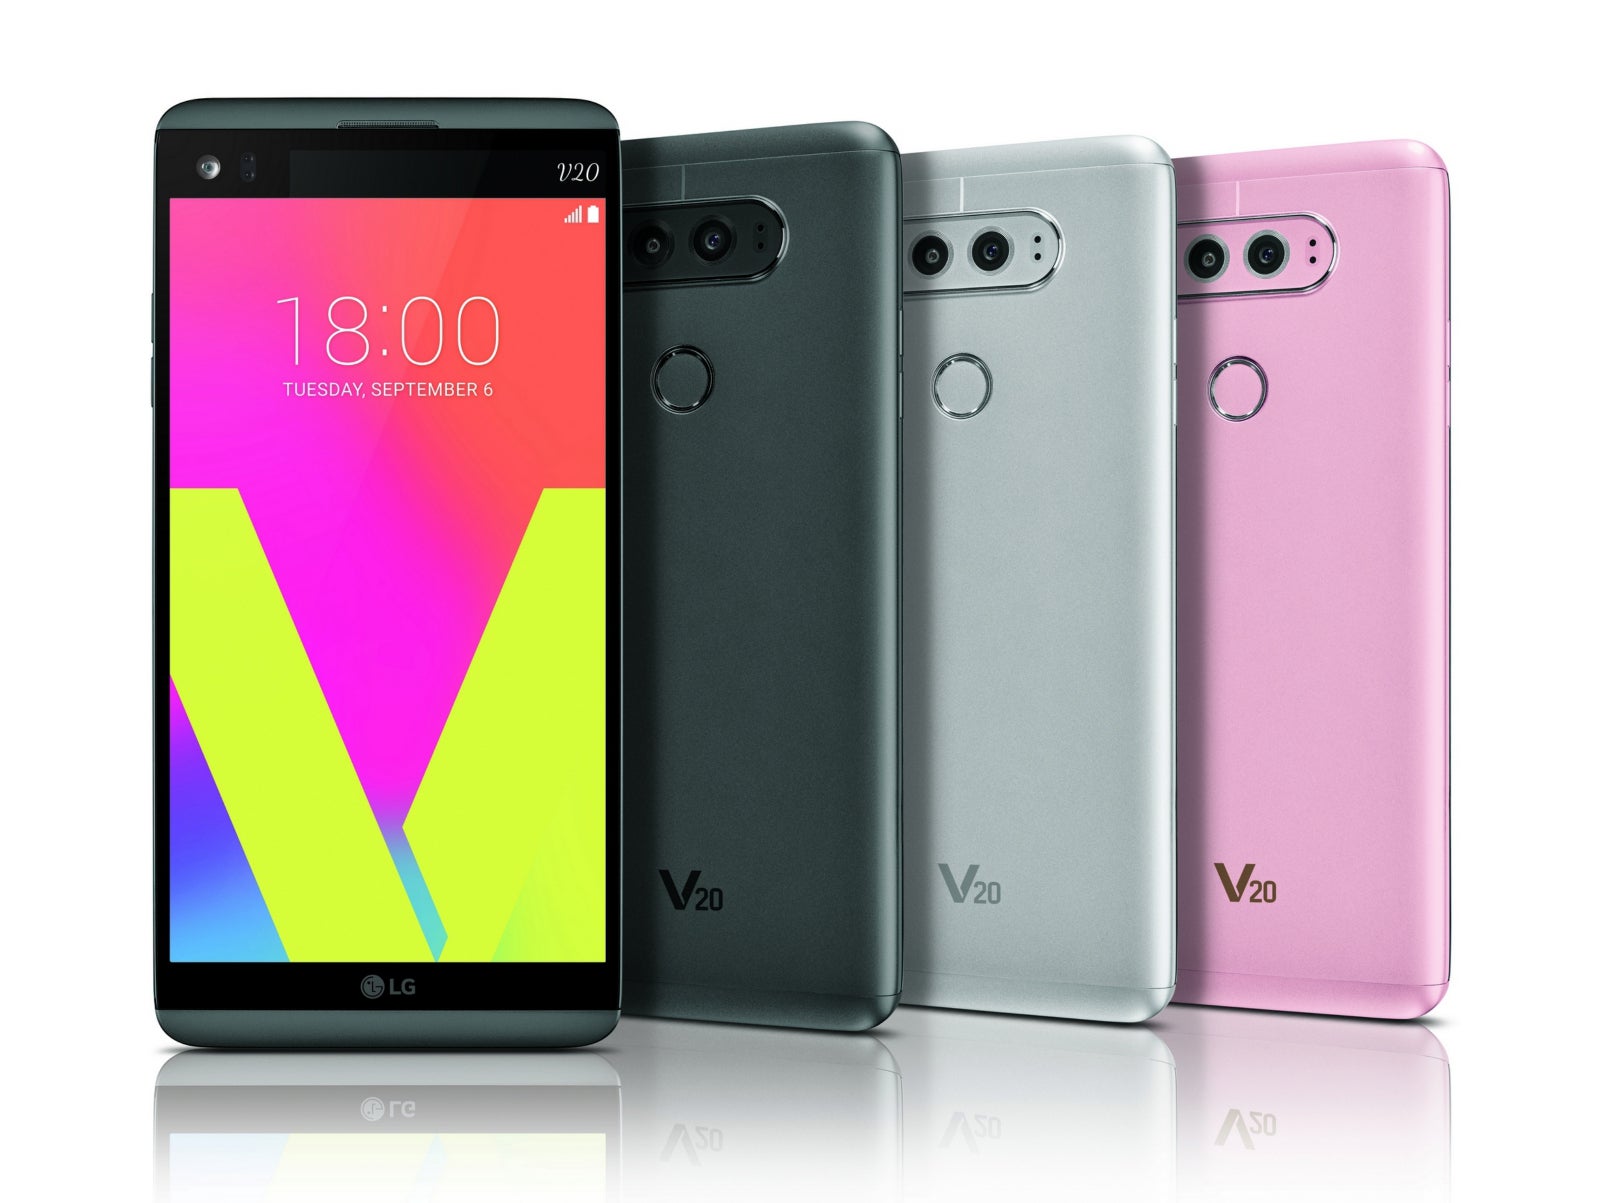 The LG V20 will be available in these three colors